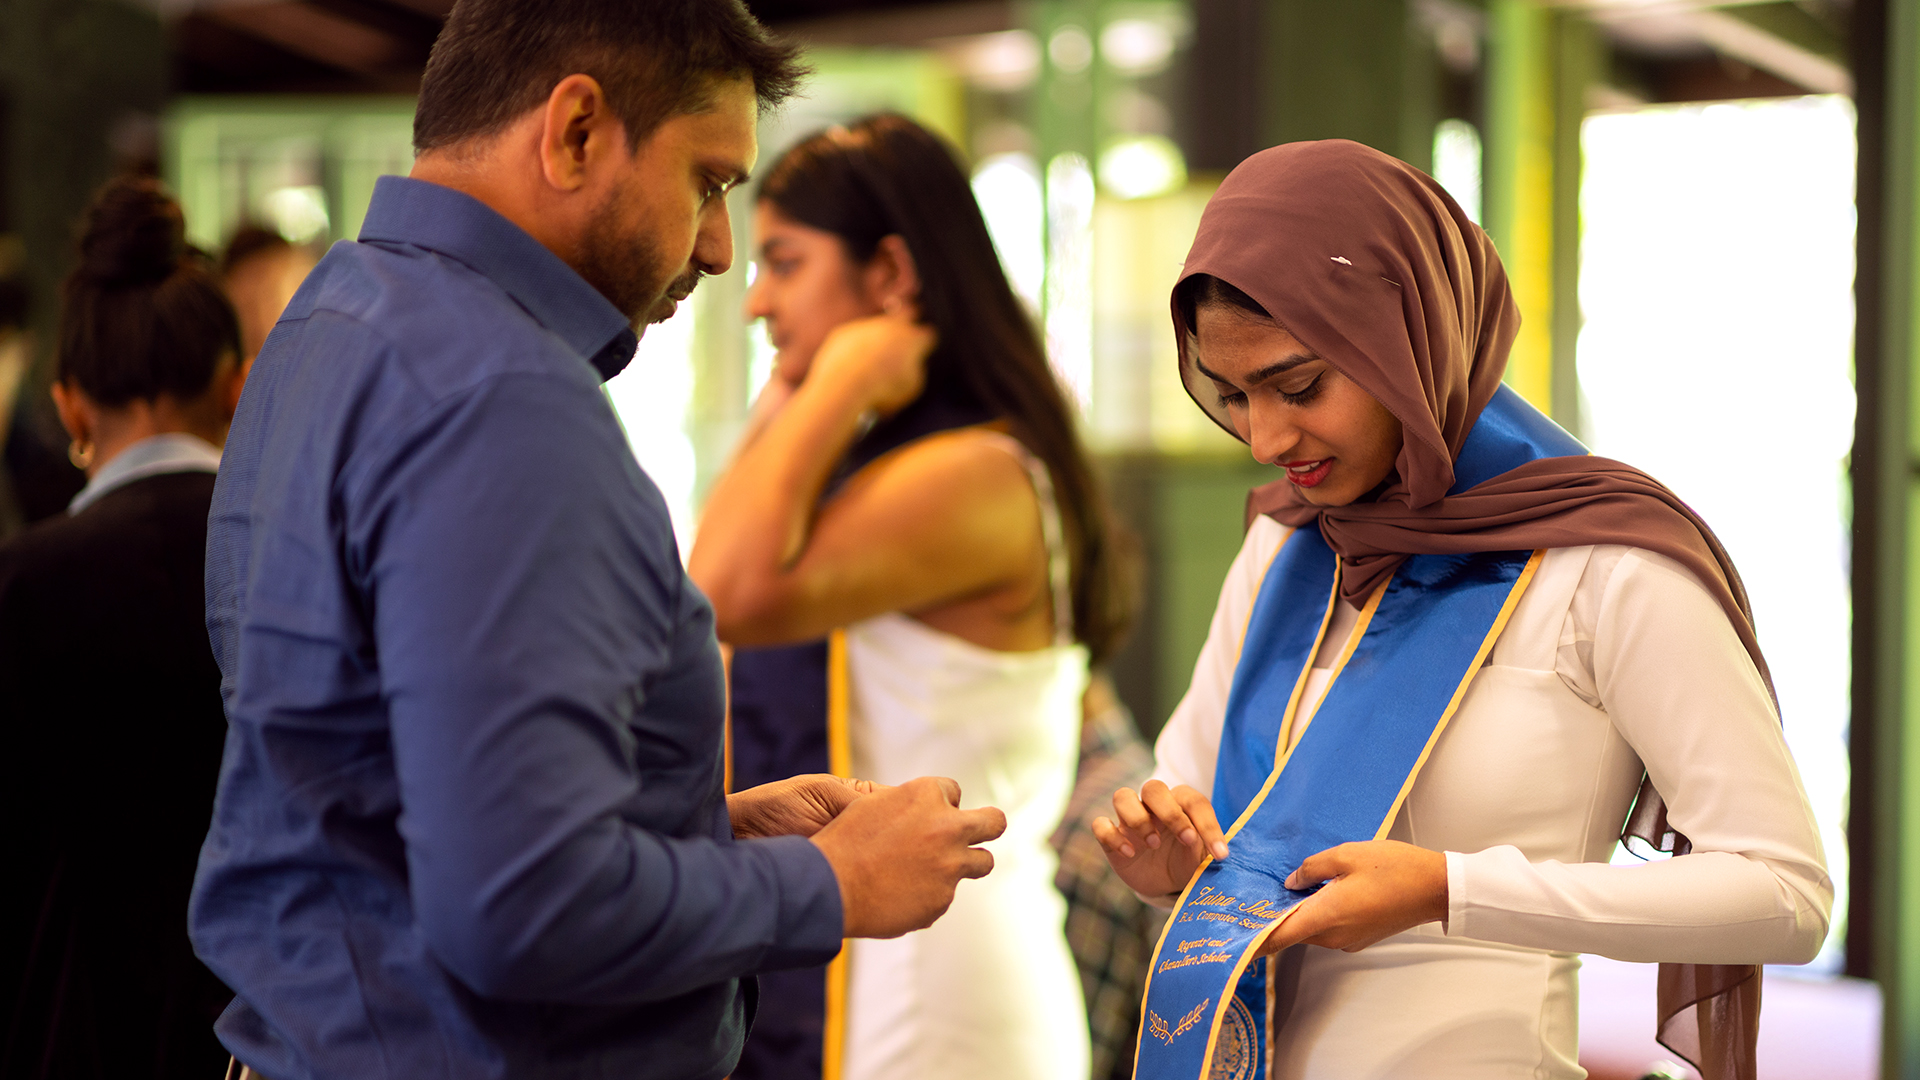 A graduating student wearing a headscarf holds out her graduation sash for it to be pinned